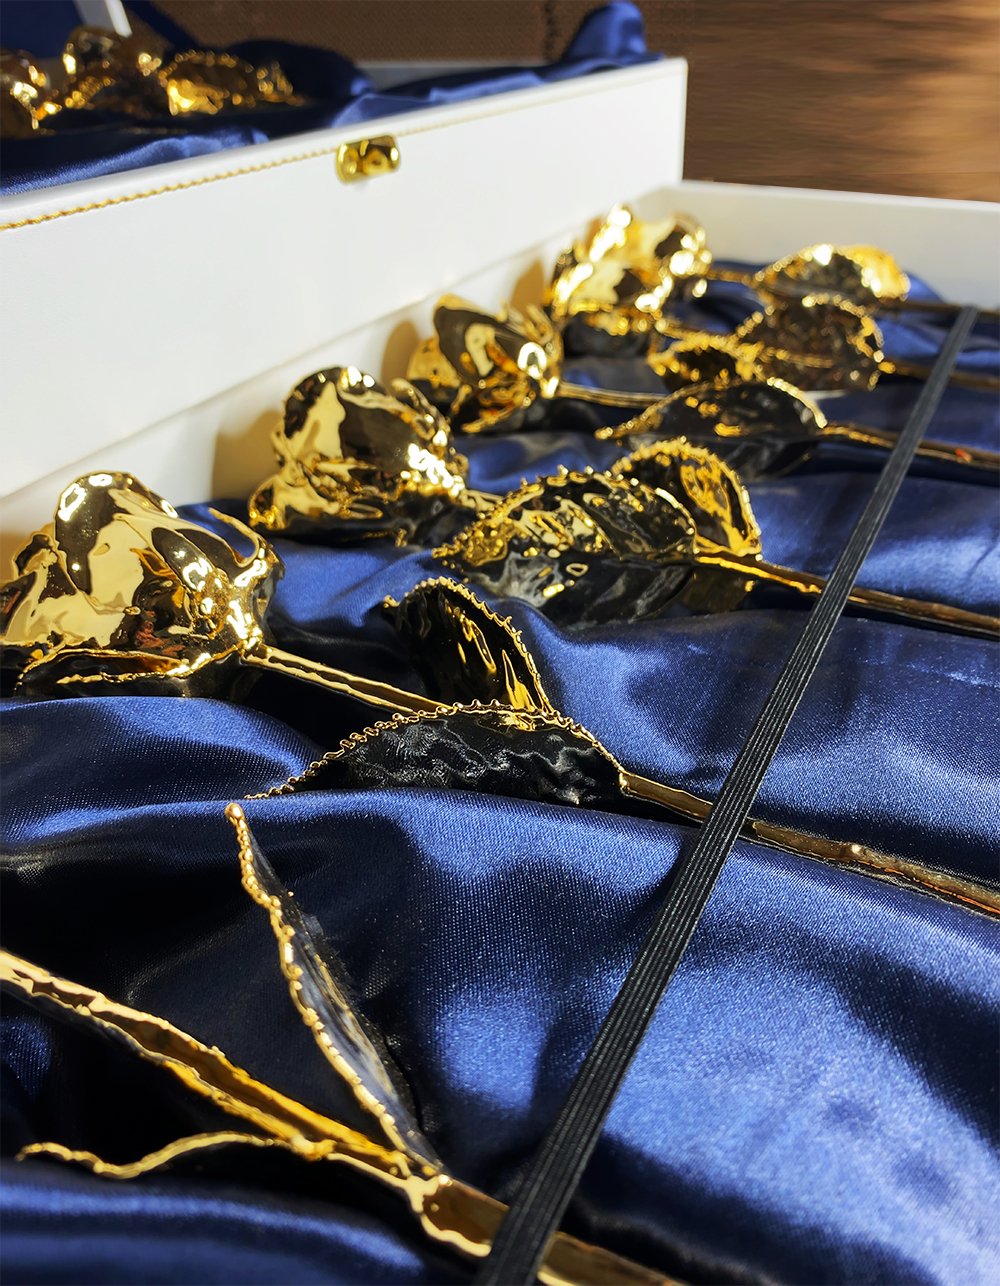 LIMITED QUANTITY: One Dozen 24K Gold Dipped Roses - Lovepicker